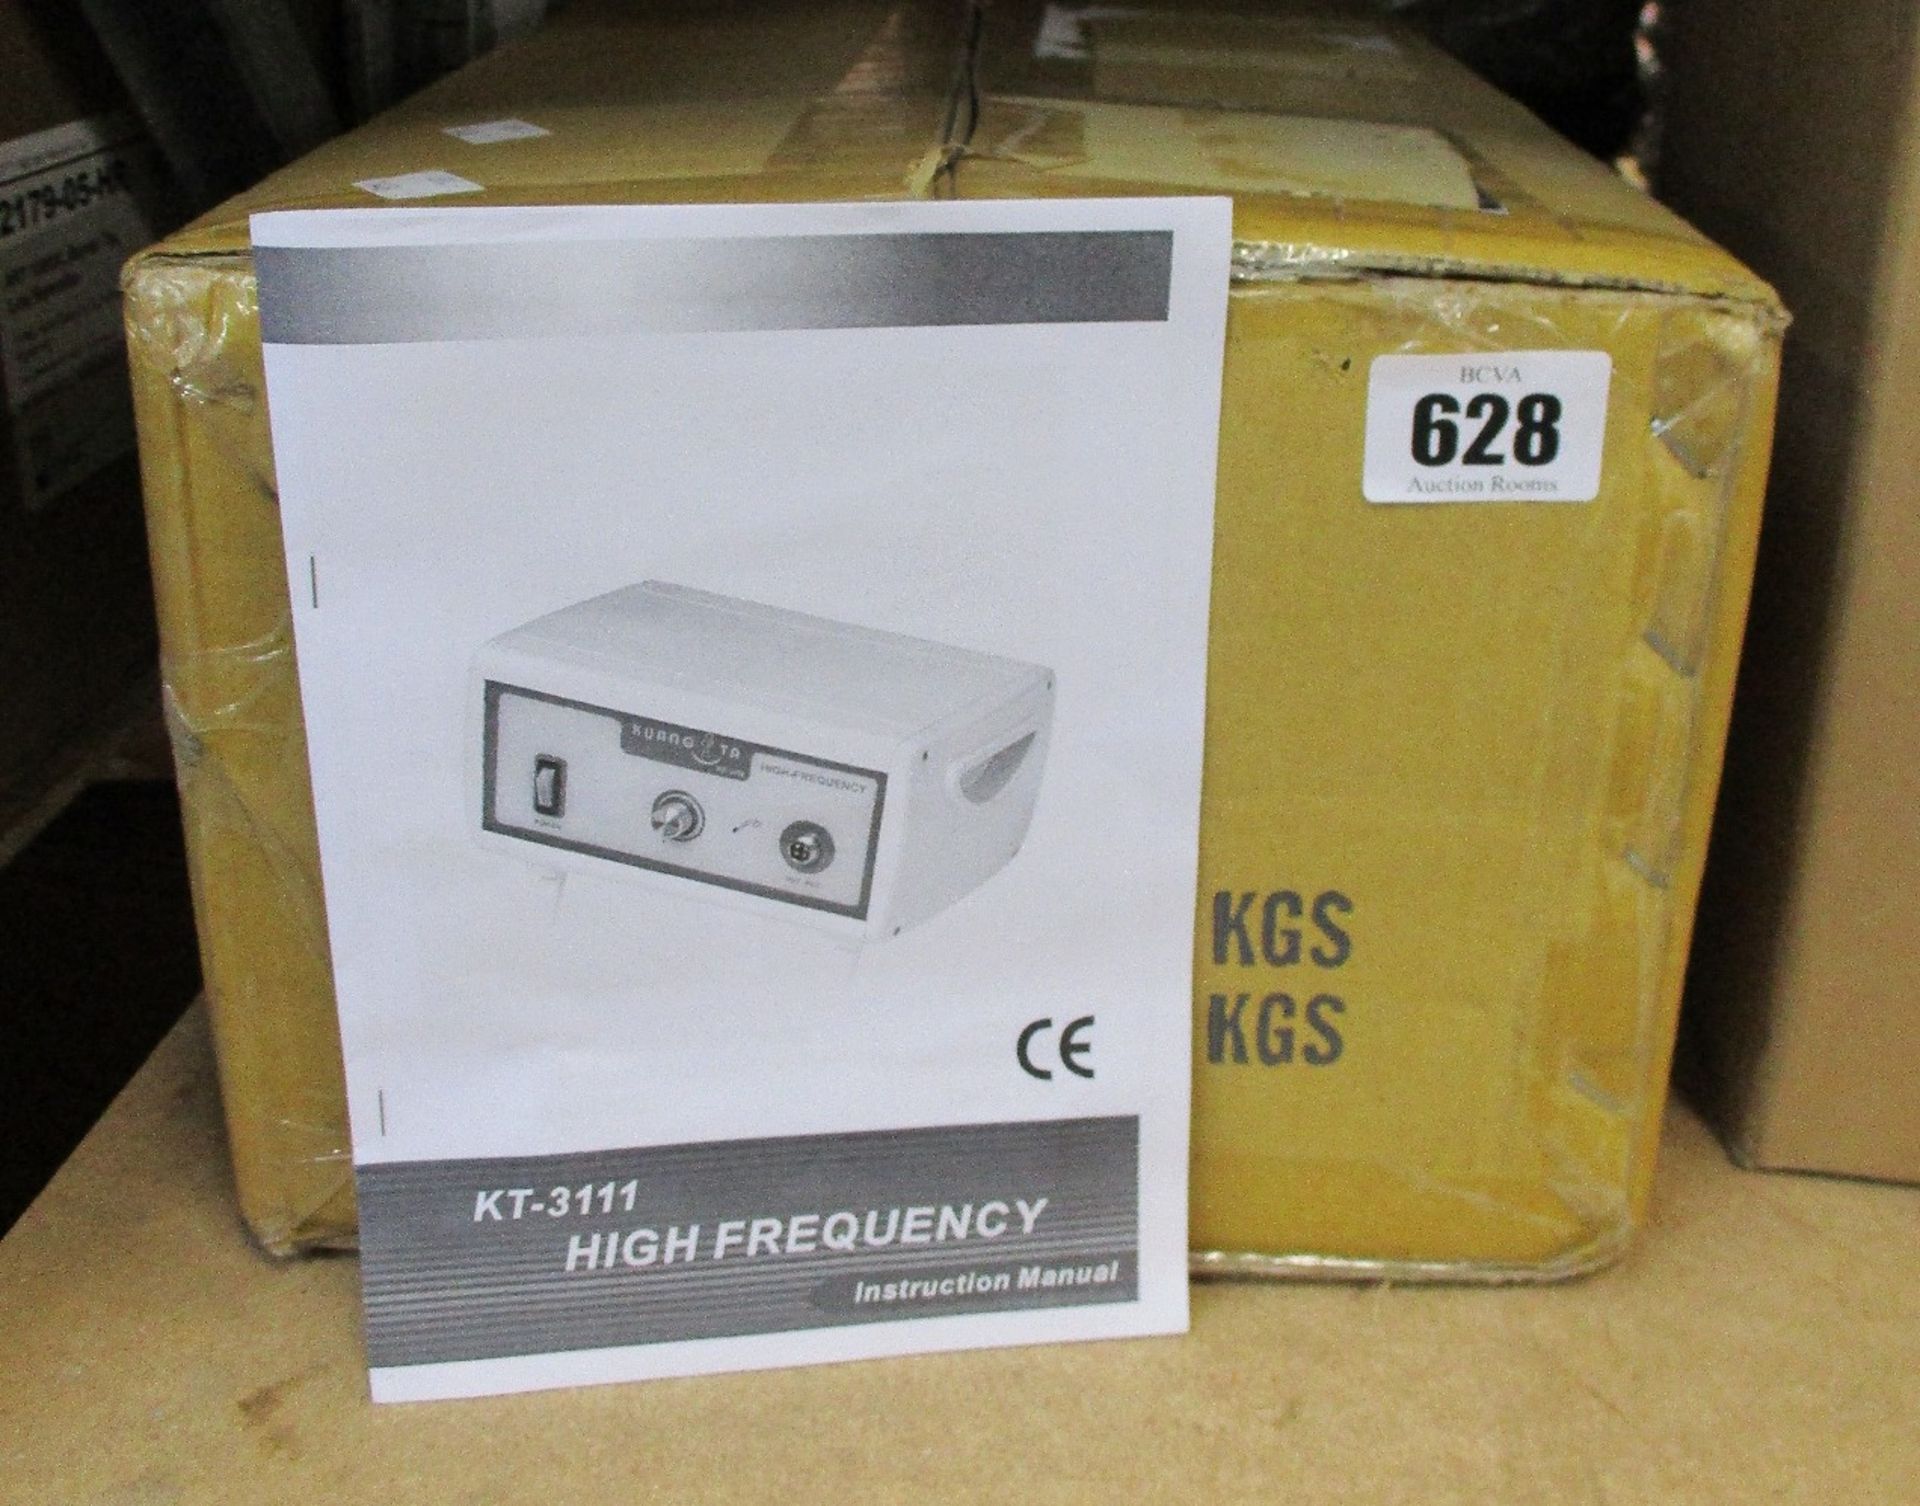 A Kuang Ta KT-3111 high frequency beauty instrument.